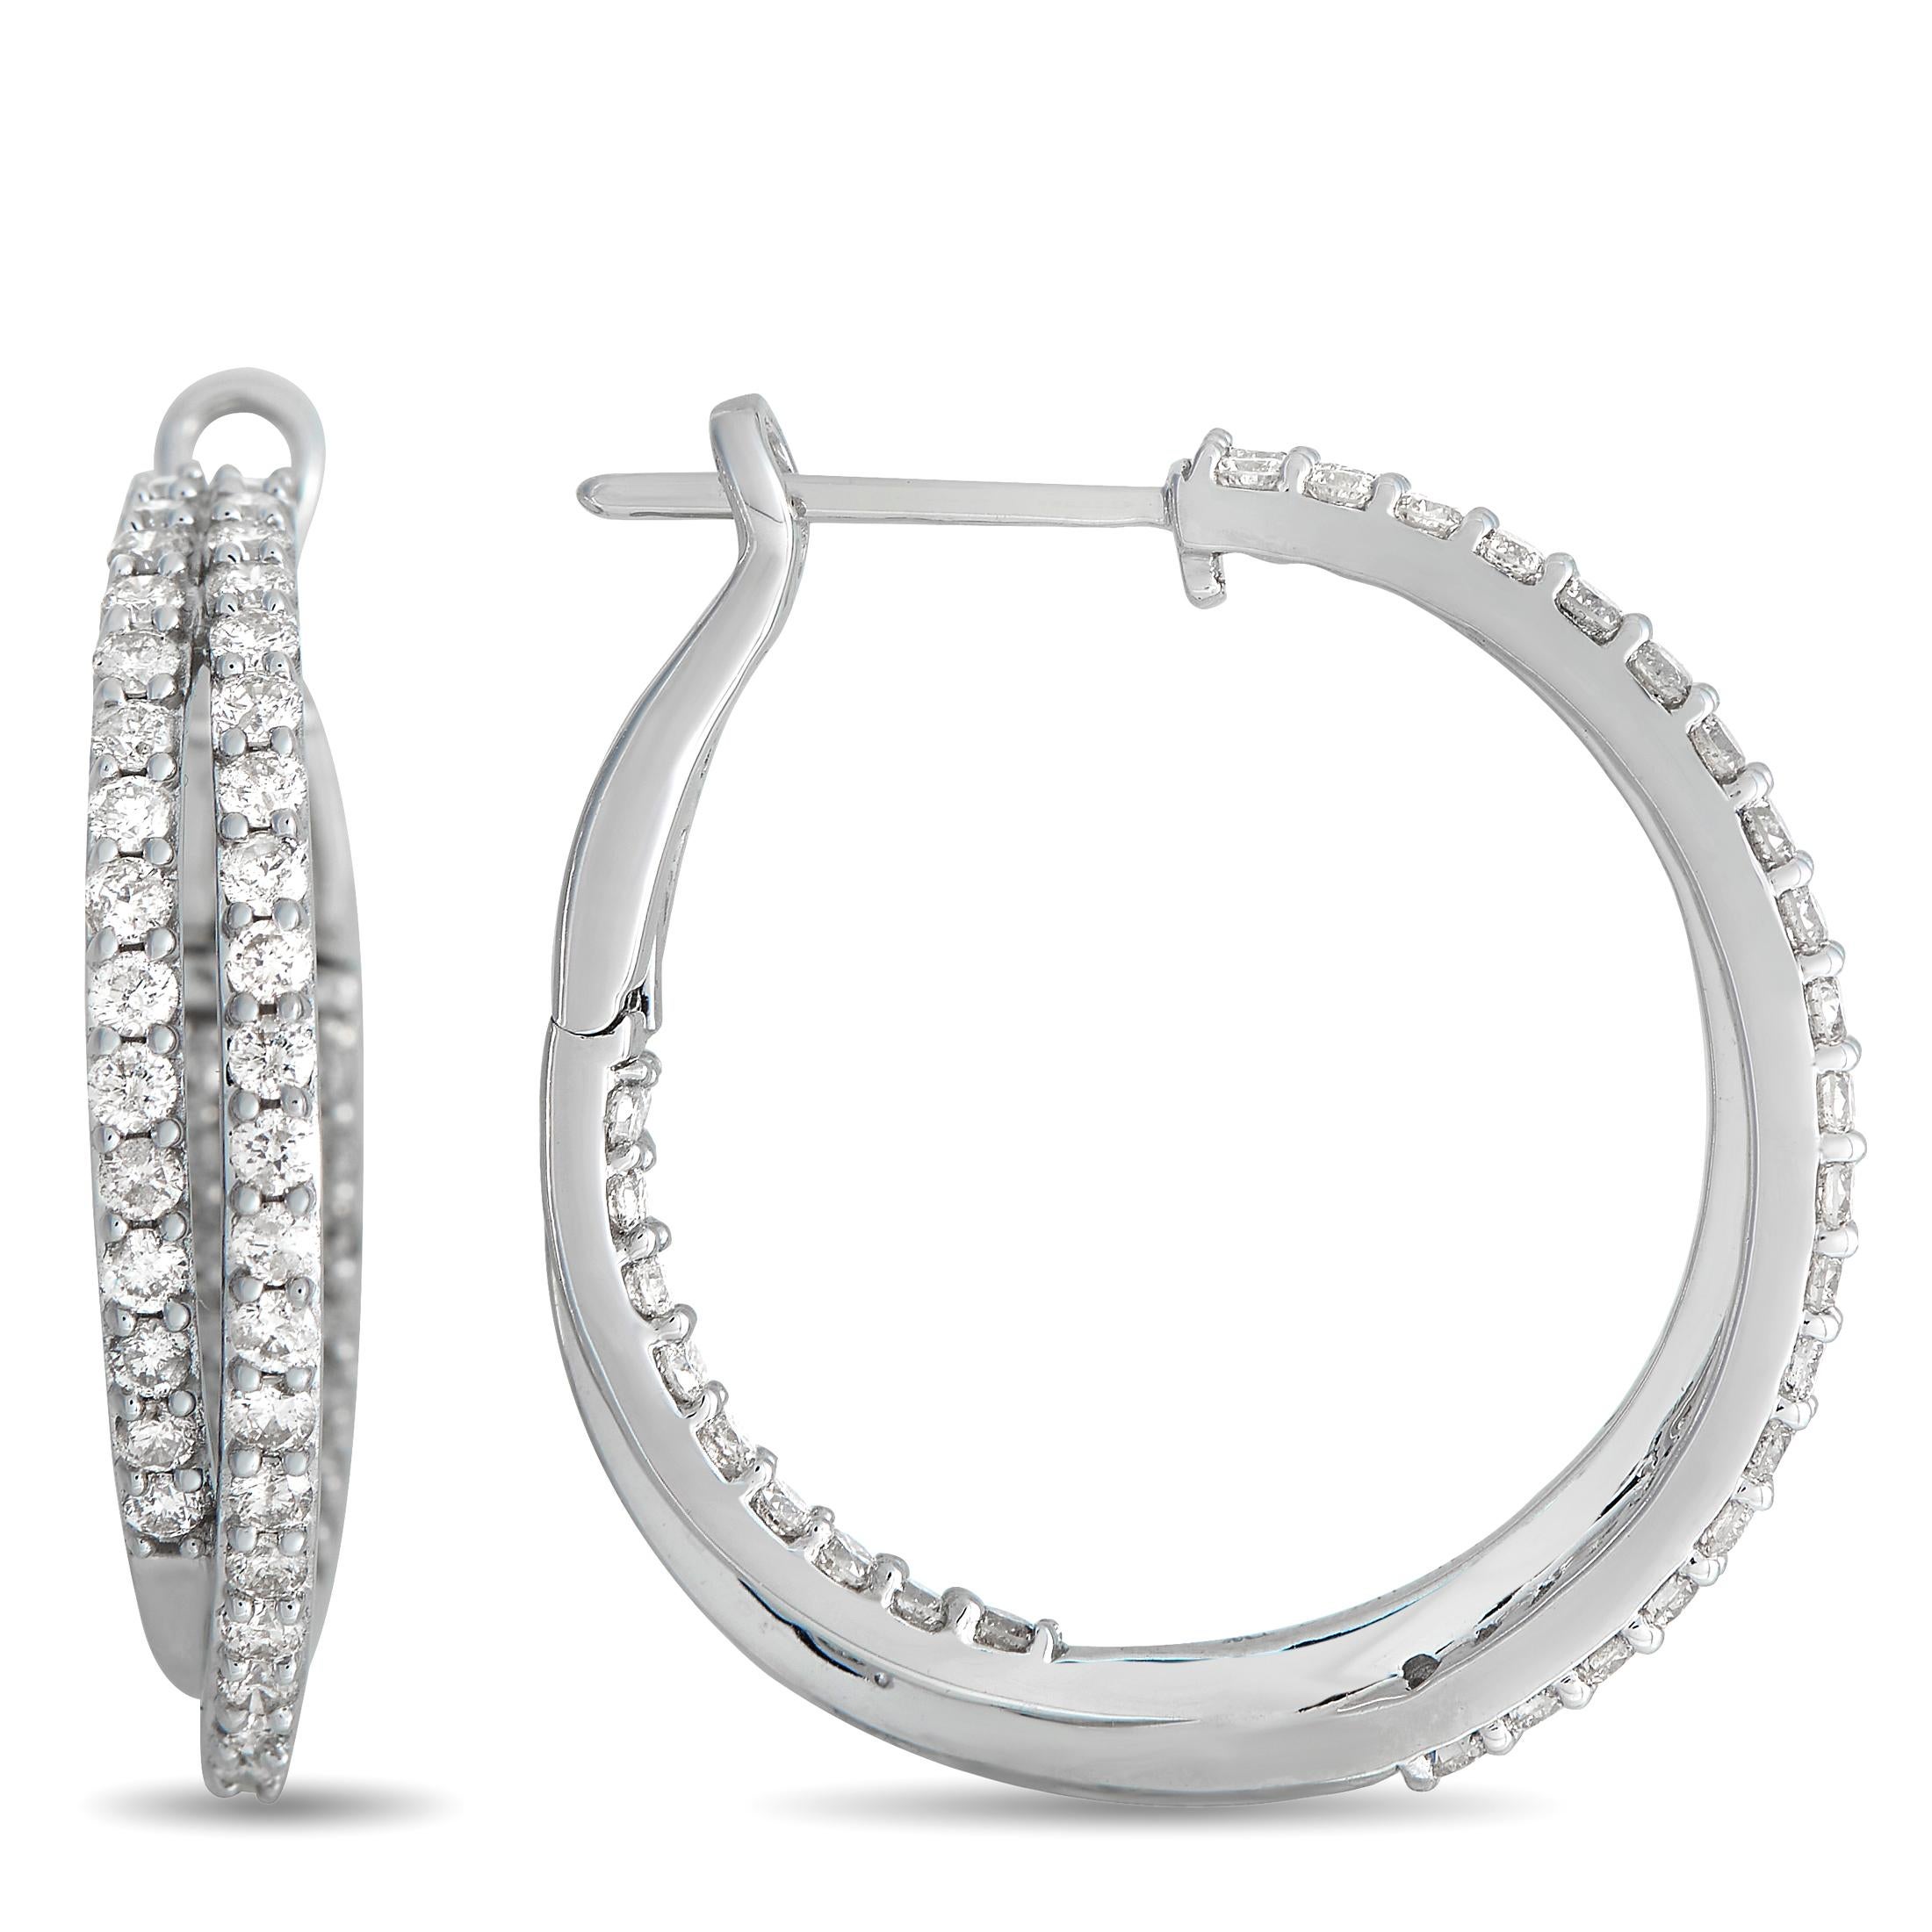 Take a look at this glittering pair of hoops you'll surely wear on repeat. The earrings are fashioned from 14K white gold and have a smooth, polished finish. Each earring has two, slim, interlocking hoops lined at the front edge and back edge with